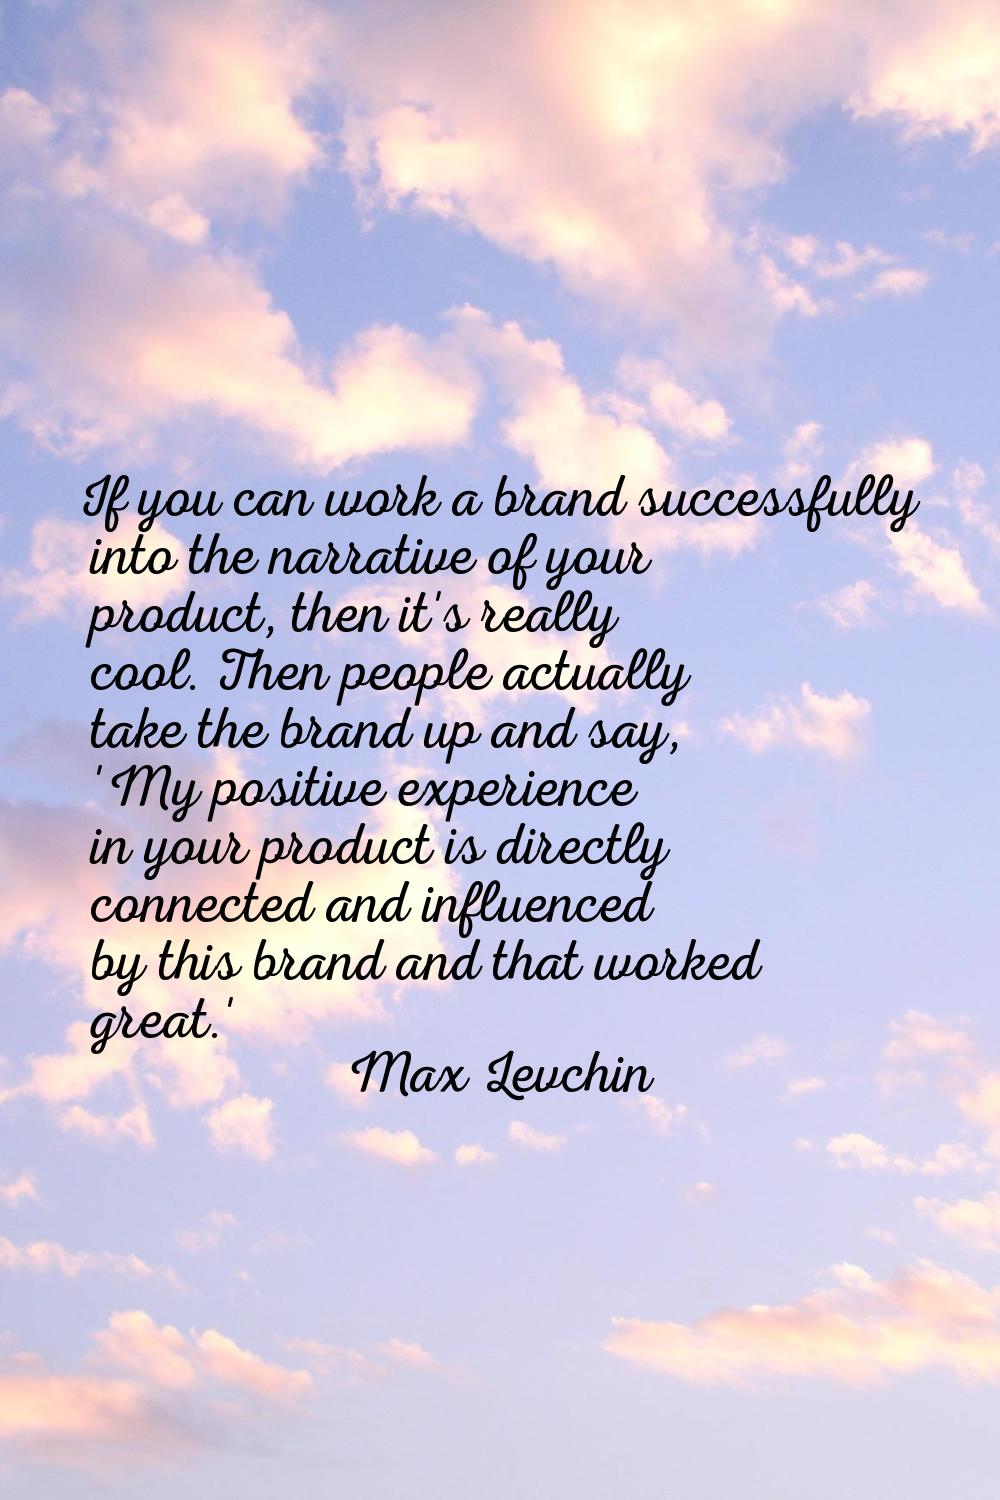 If you can work a brand successfully into the narrative of your product, then it's really cool. The